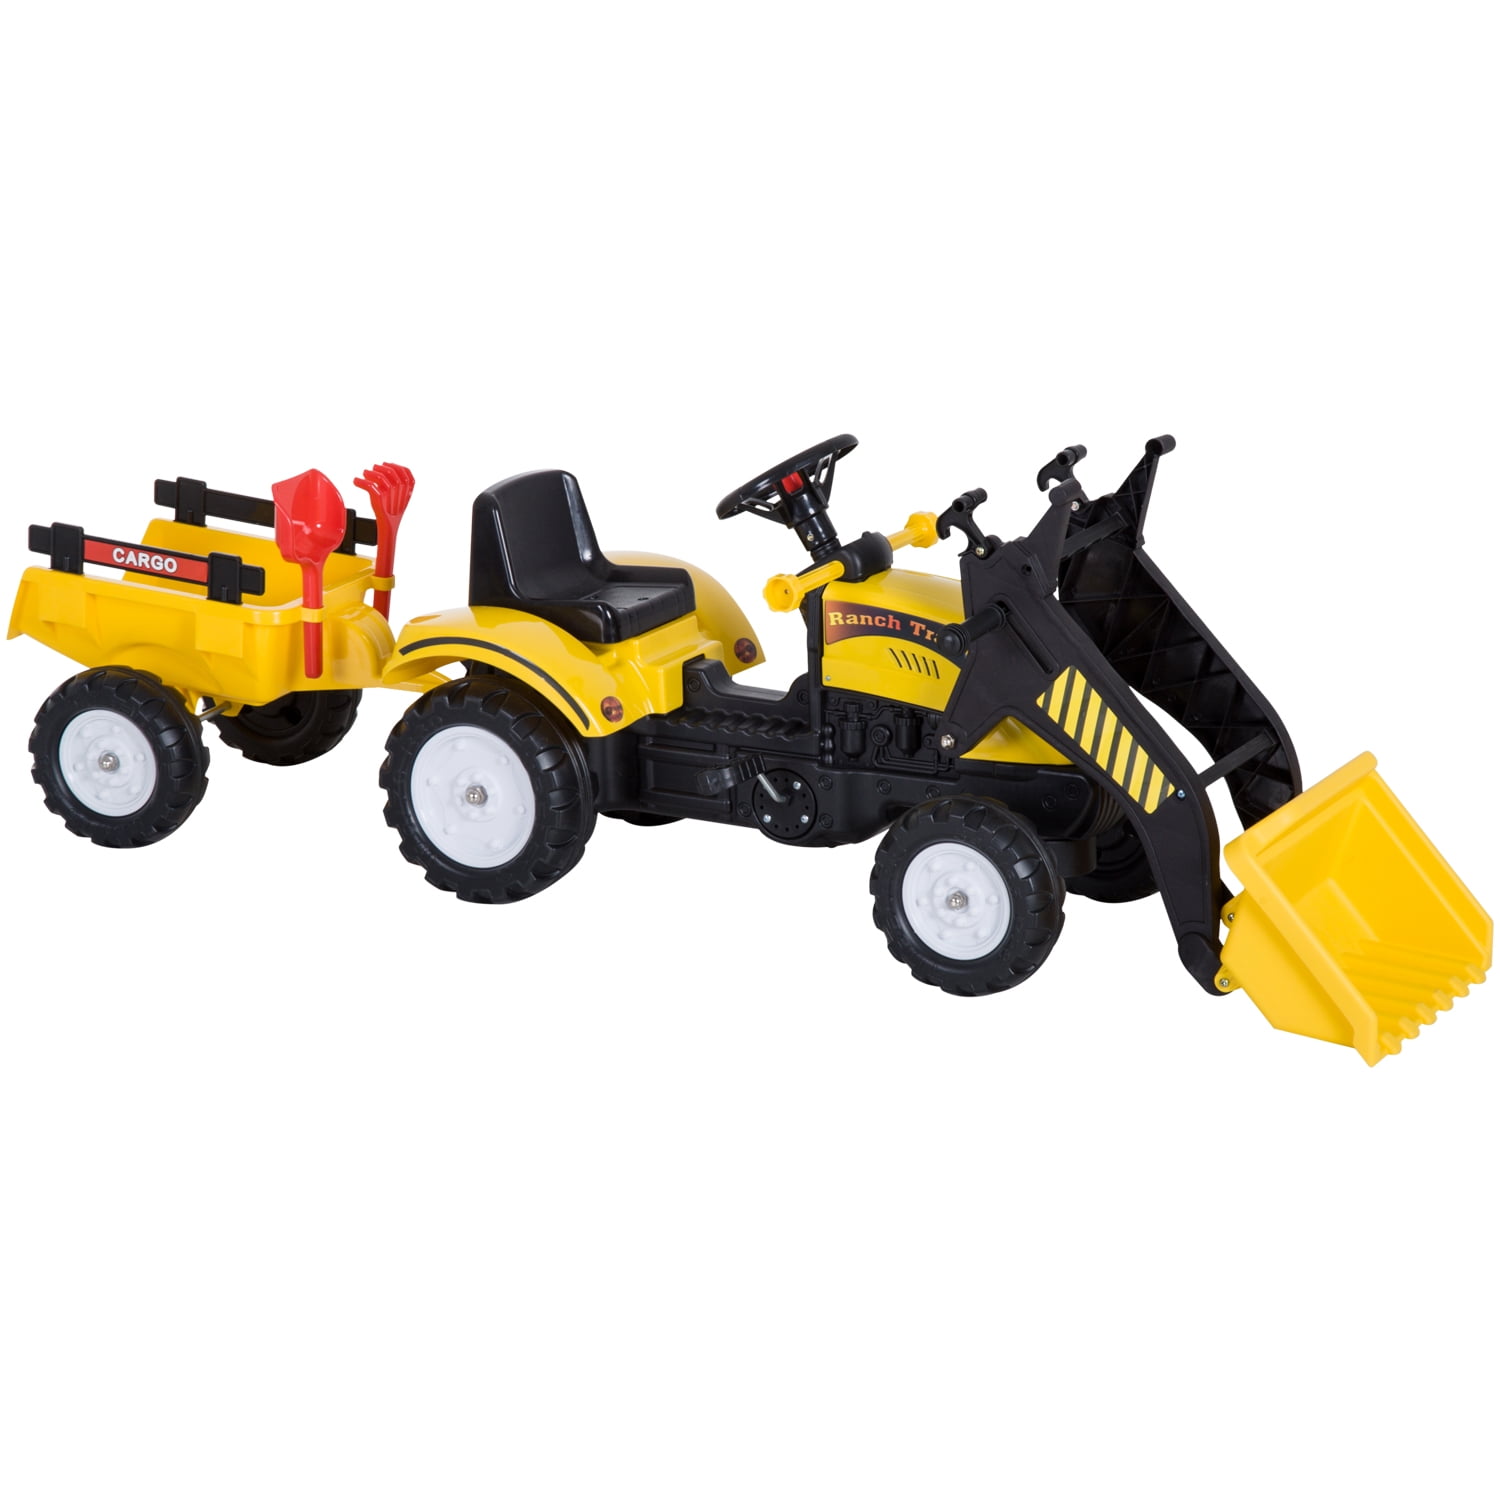 Kids Ride On Excavator Outdoor Bulldozer Digger Scooper Pulling Cart Toys Gift 